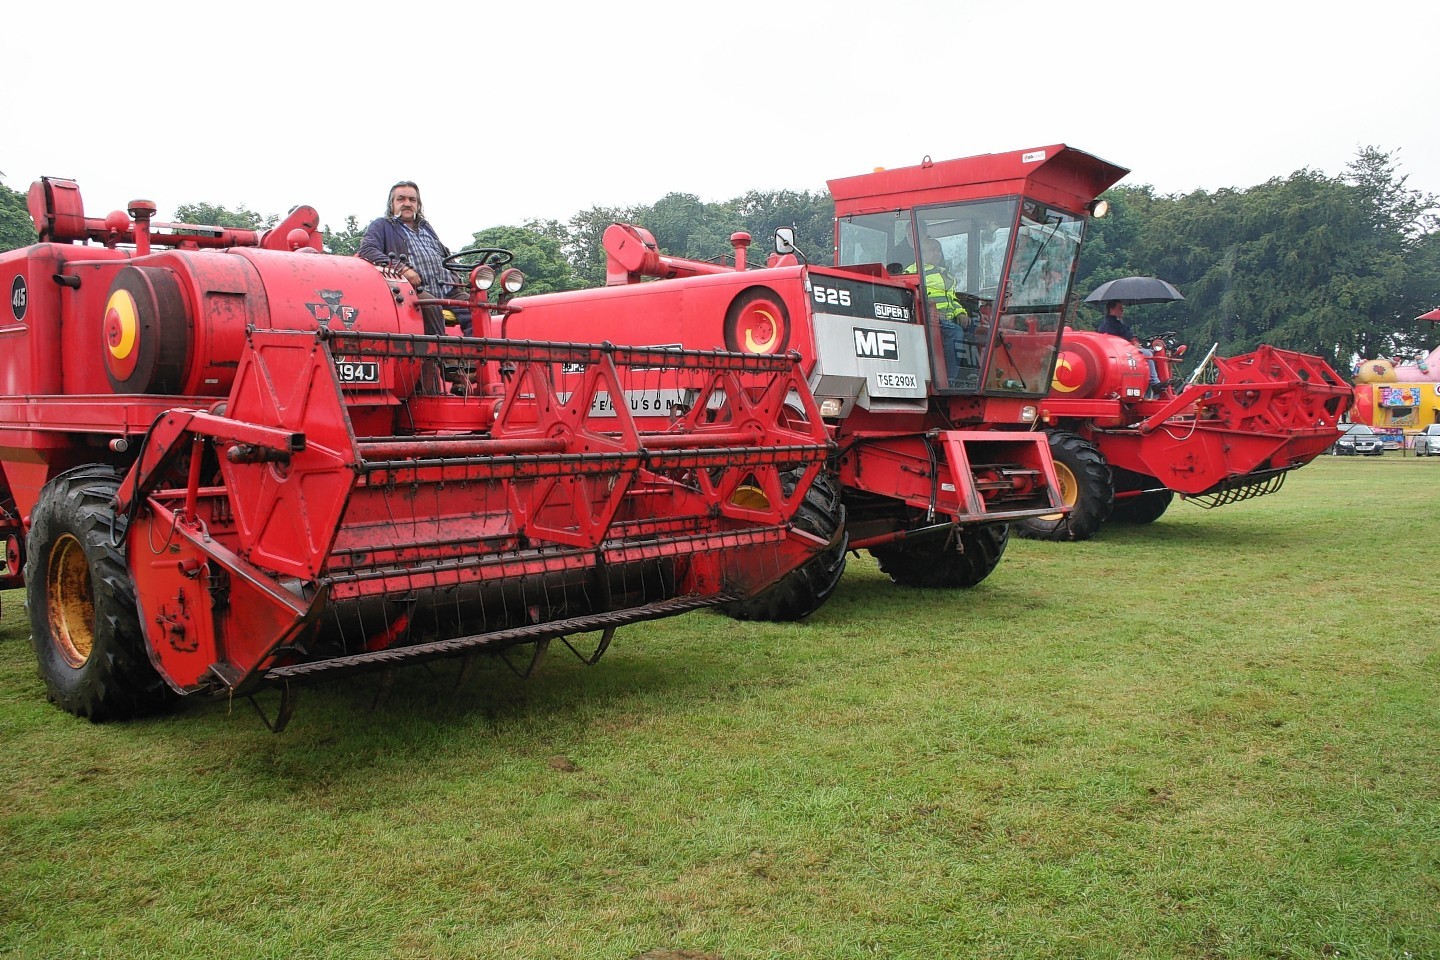 Three Massey Ferguson combines manufactured in Kilmarnock help swell the main ring during the machinery parade